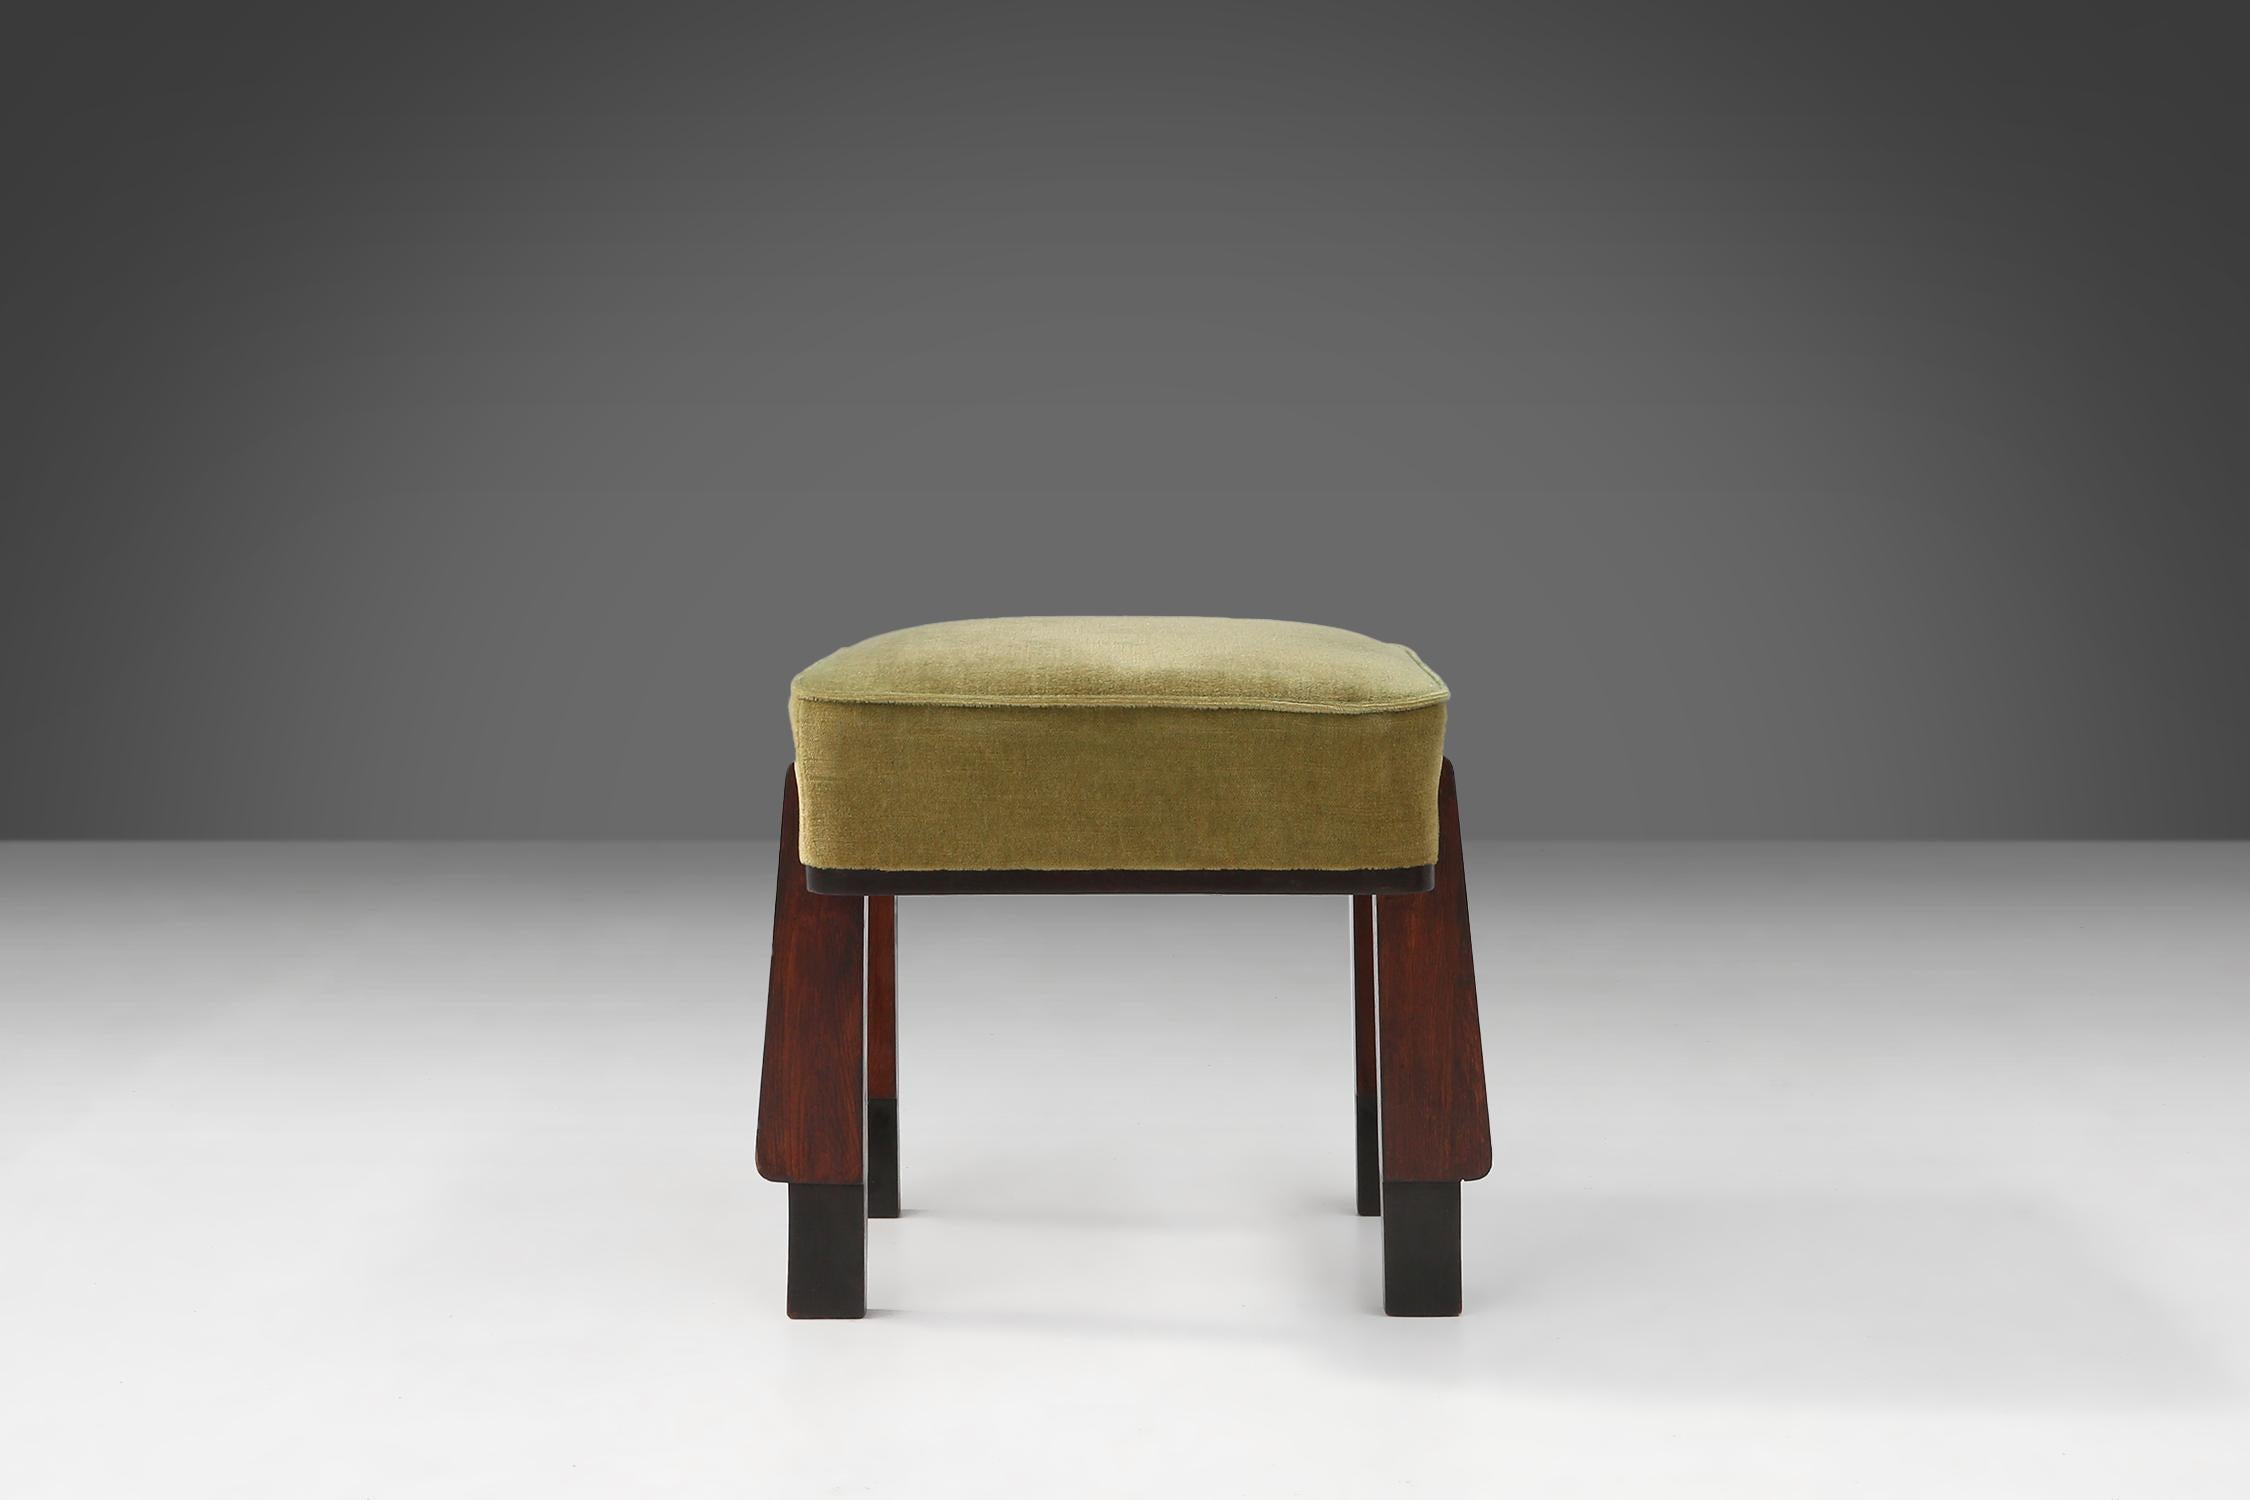 France / 1930 / 3 stools / wood and green velvet / Art Deco 

A rare find, these 3 similar art deco pieces with luxurious green velvet upholstery and geometric legs with black lacquered on the bottom parts. Made in France in the 1930s.

Very